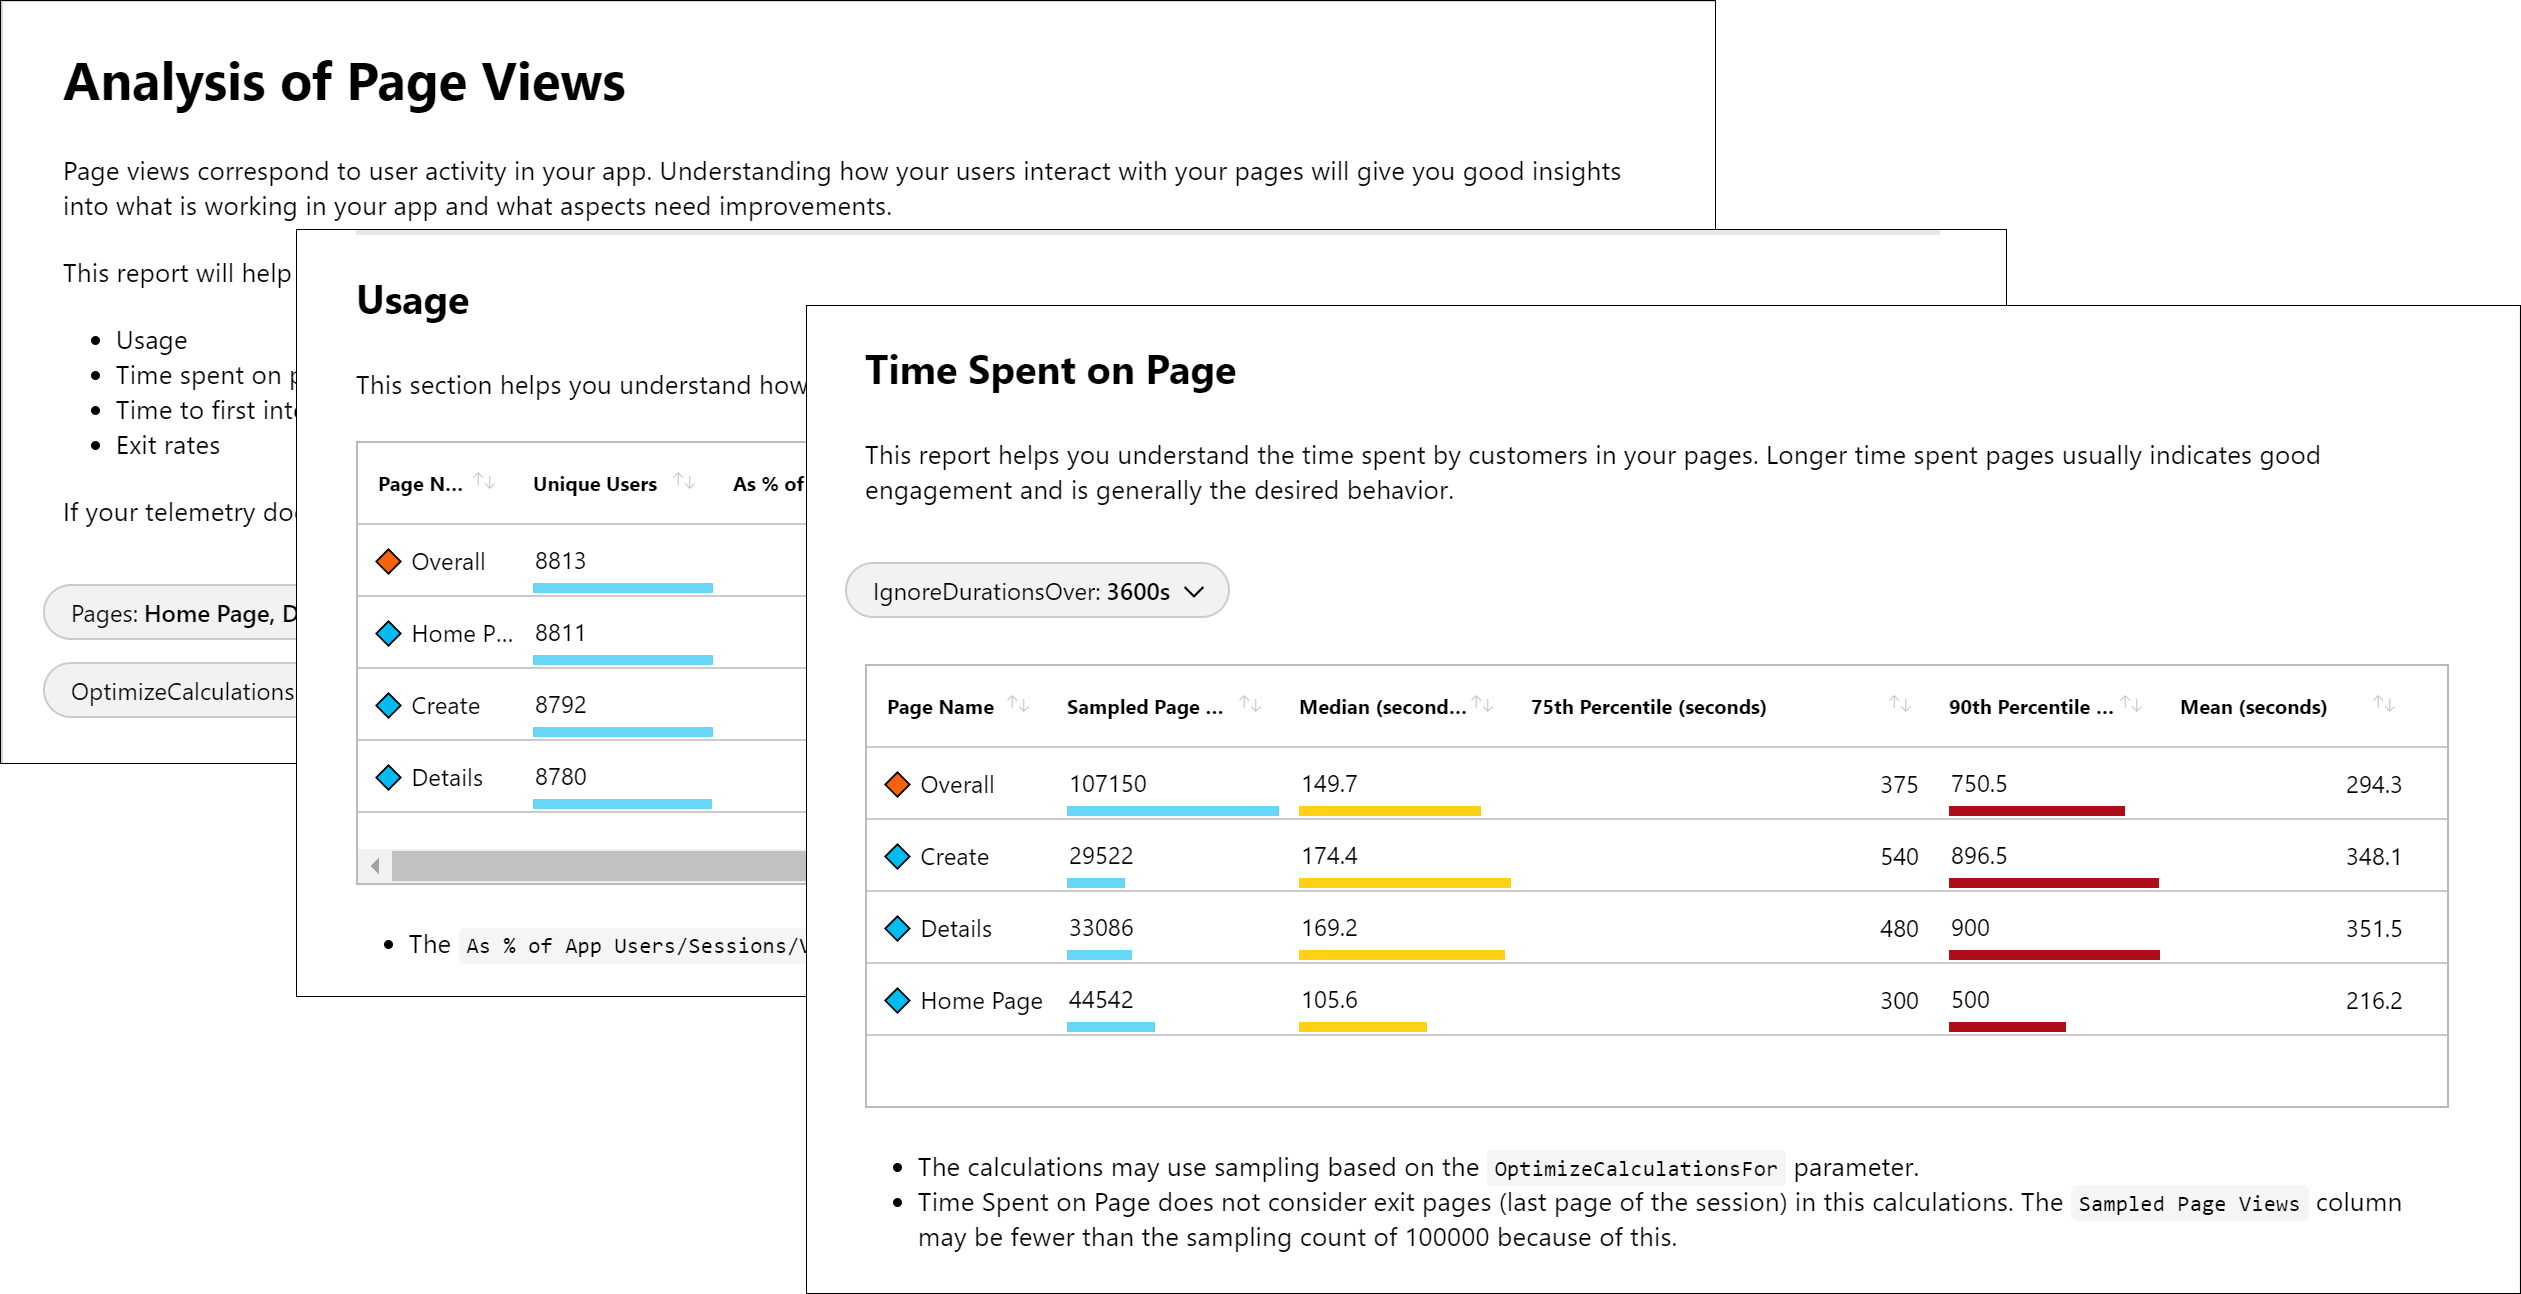 Diagram that shows screenshots of three pages from a workbook, including Analysis of Page Views, Usage, and Time Spent on Page.